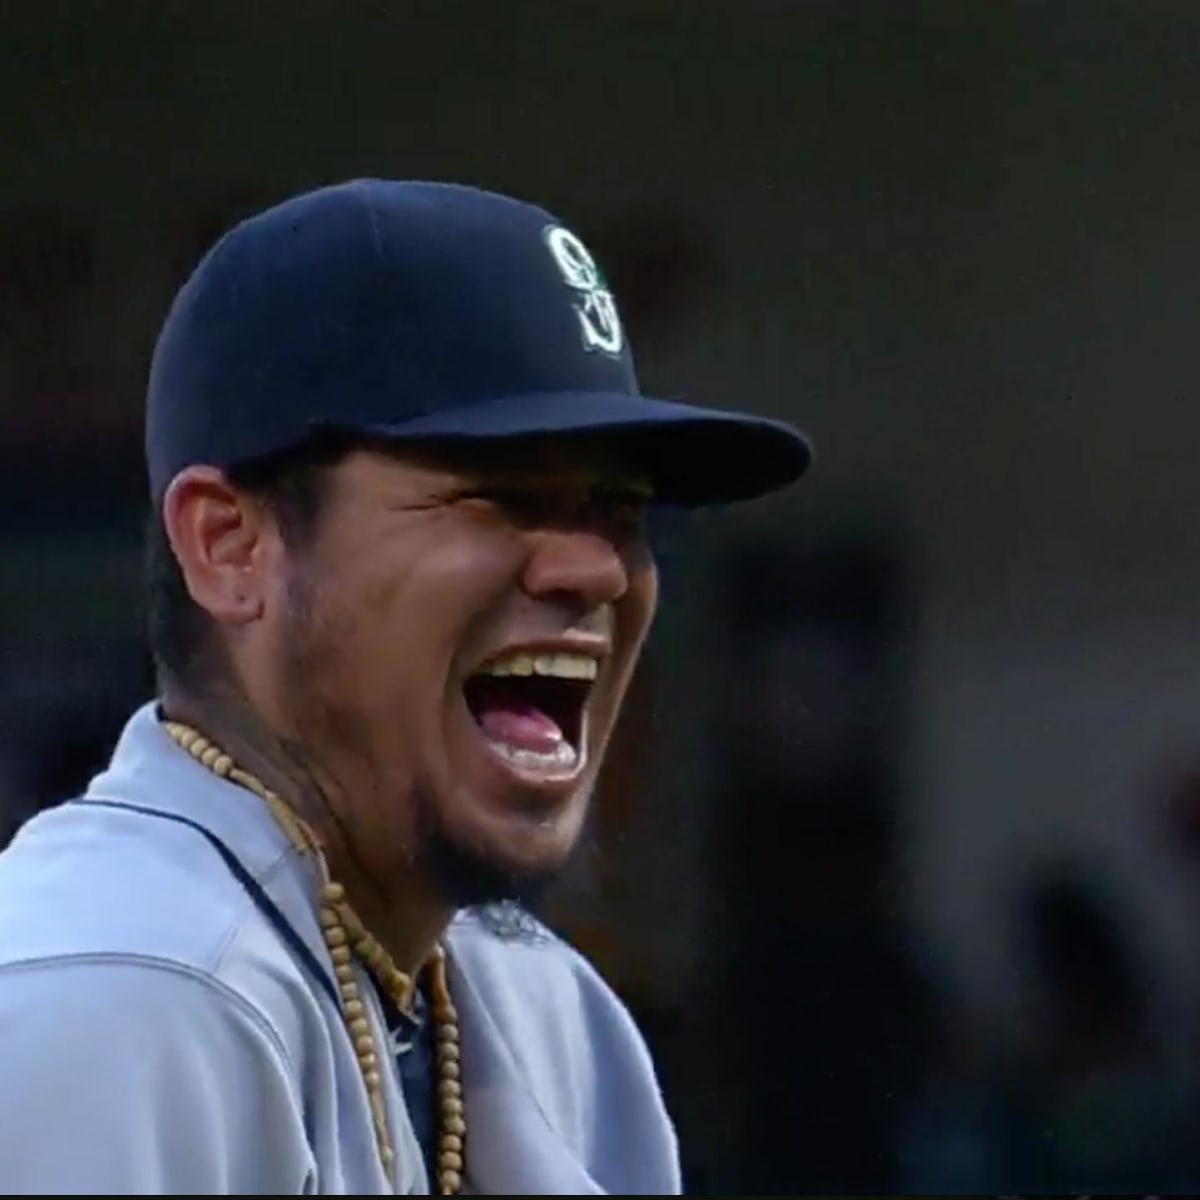 Felix Hernandez laughs hysterically after striking out Adrian